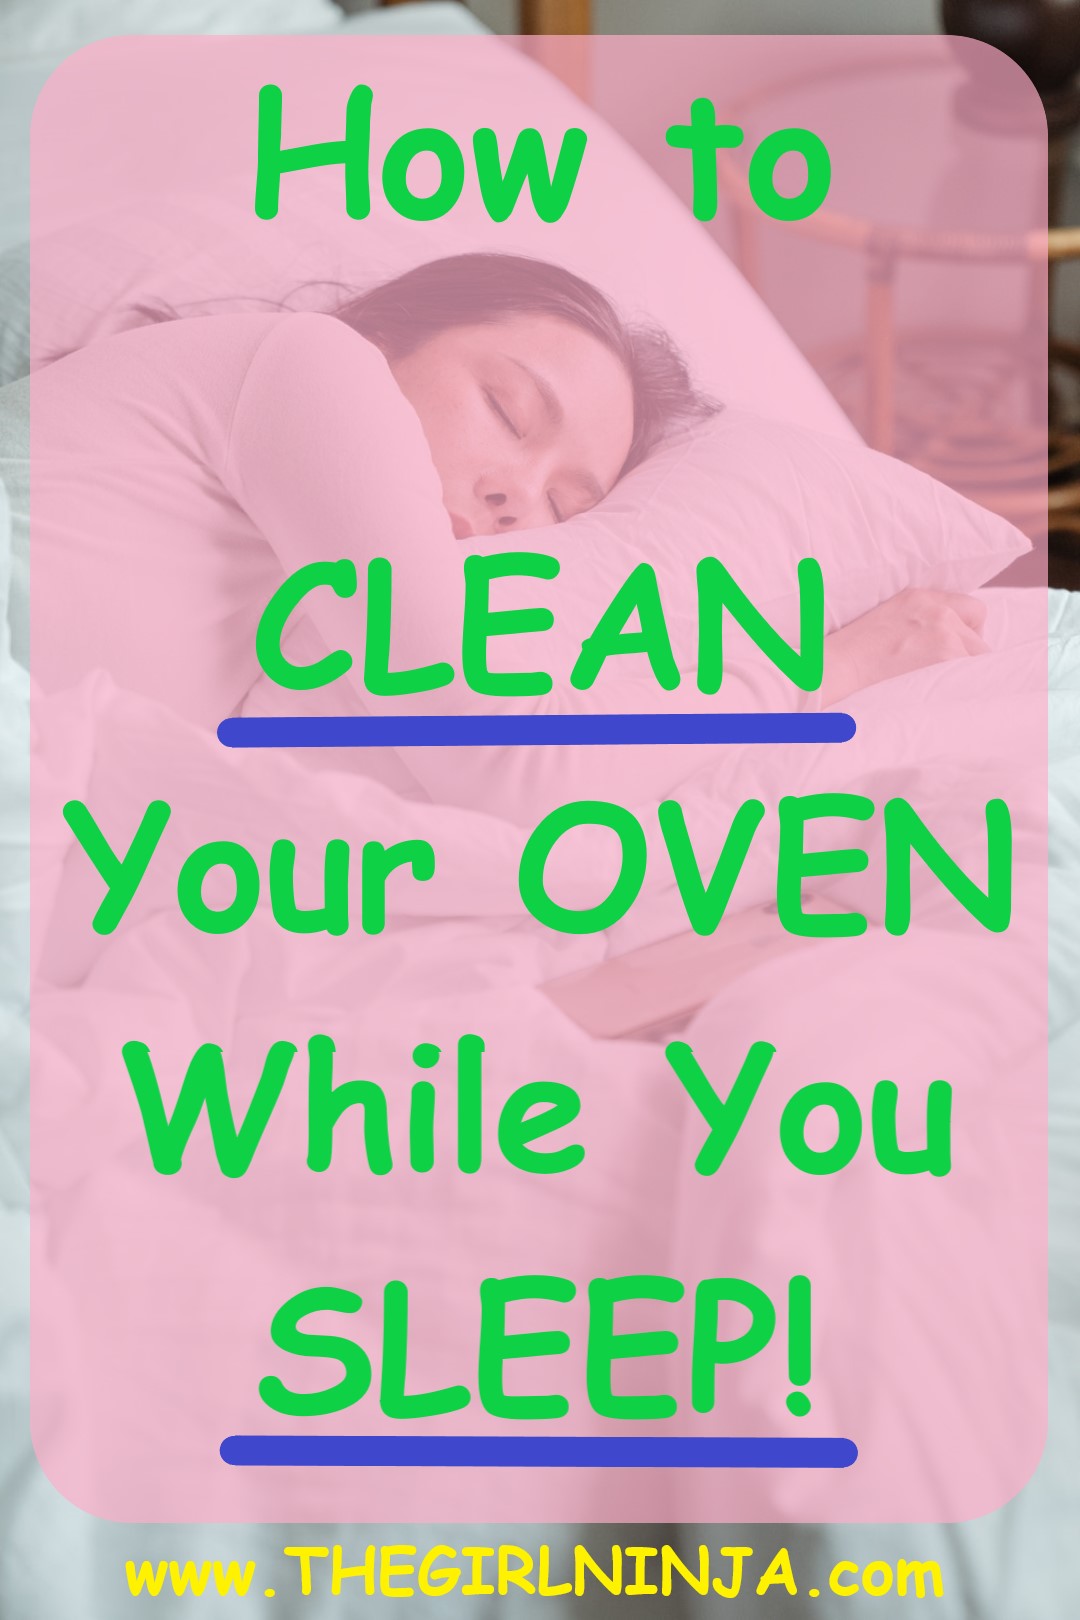 A woman with dark brown hair lay sleeping on white sheets in a white shirt. A translucent pink rectangle over woman and bed, has green text that reads How to CLEAN Your OVEN While You SLEEP! Yellow text at bottom center reads www.THEGIRLNINJA.com